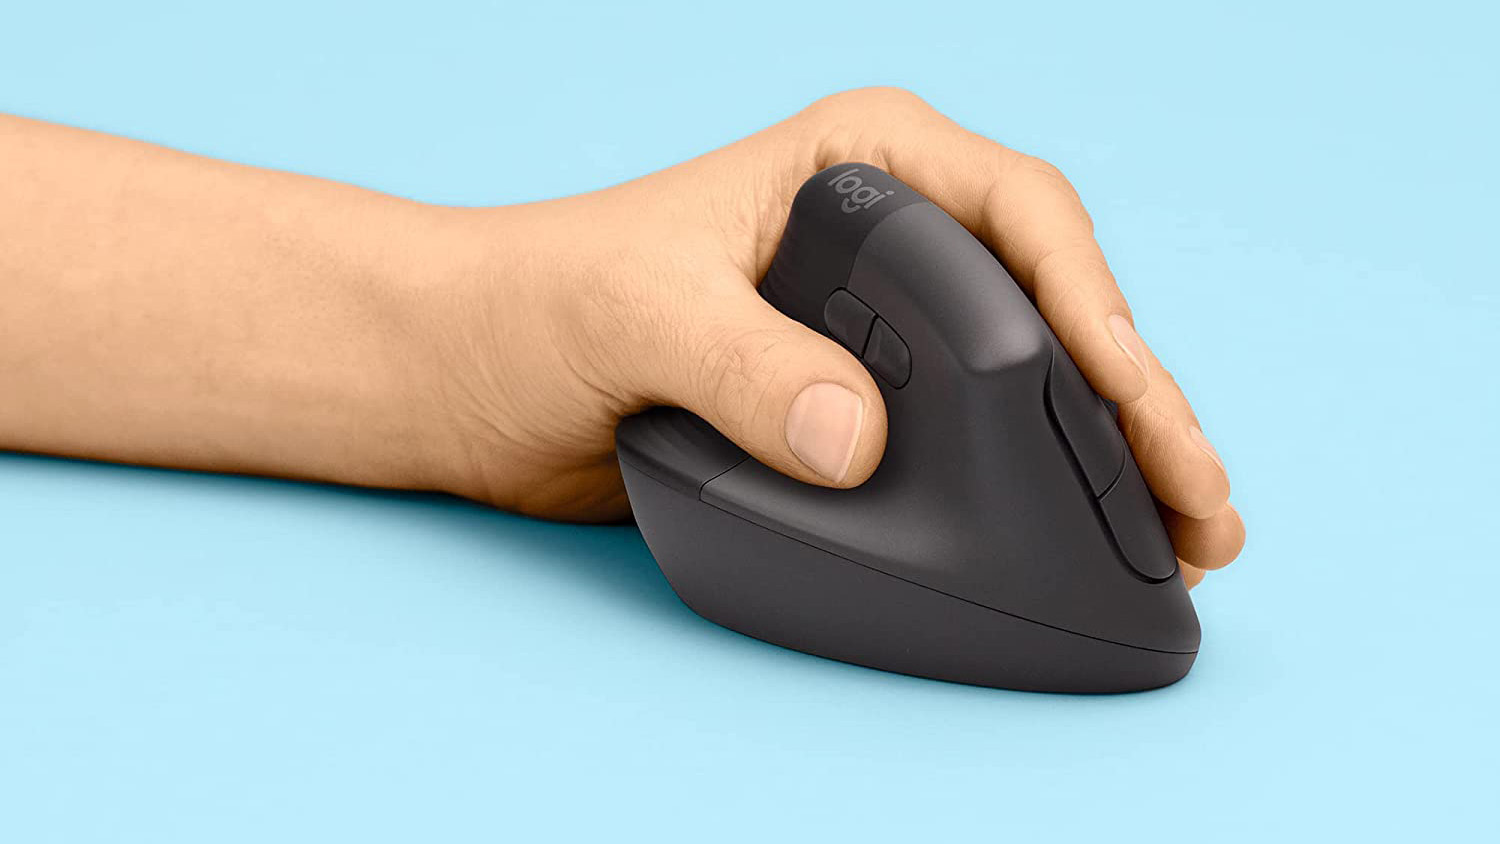 The new Logitech Lift a cheaper, colorful vertical ergonomic mouse with left-handed version and long battery life - NotebookCheck.net News